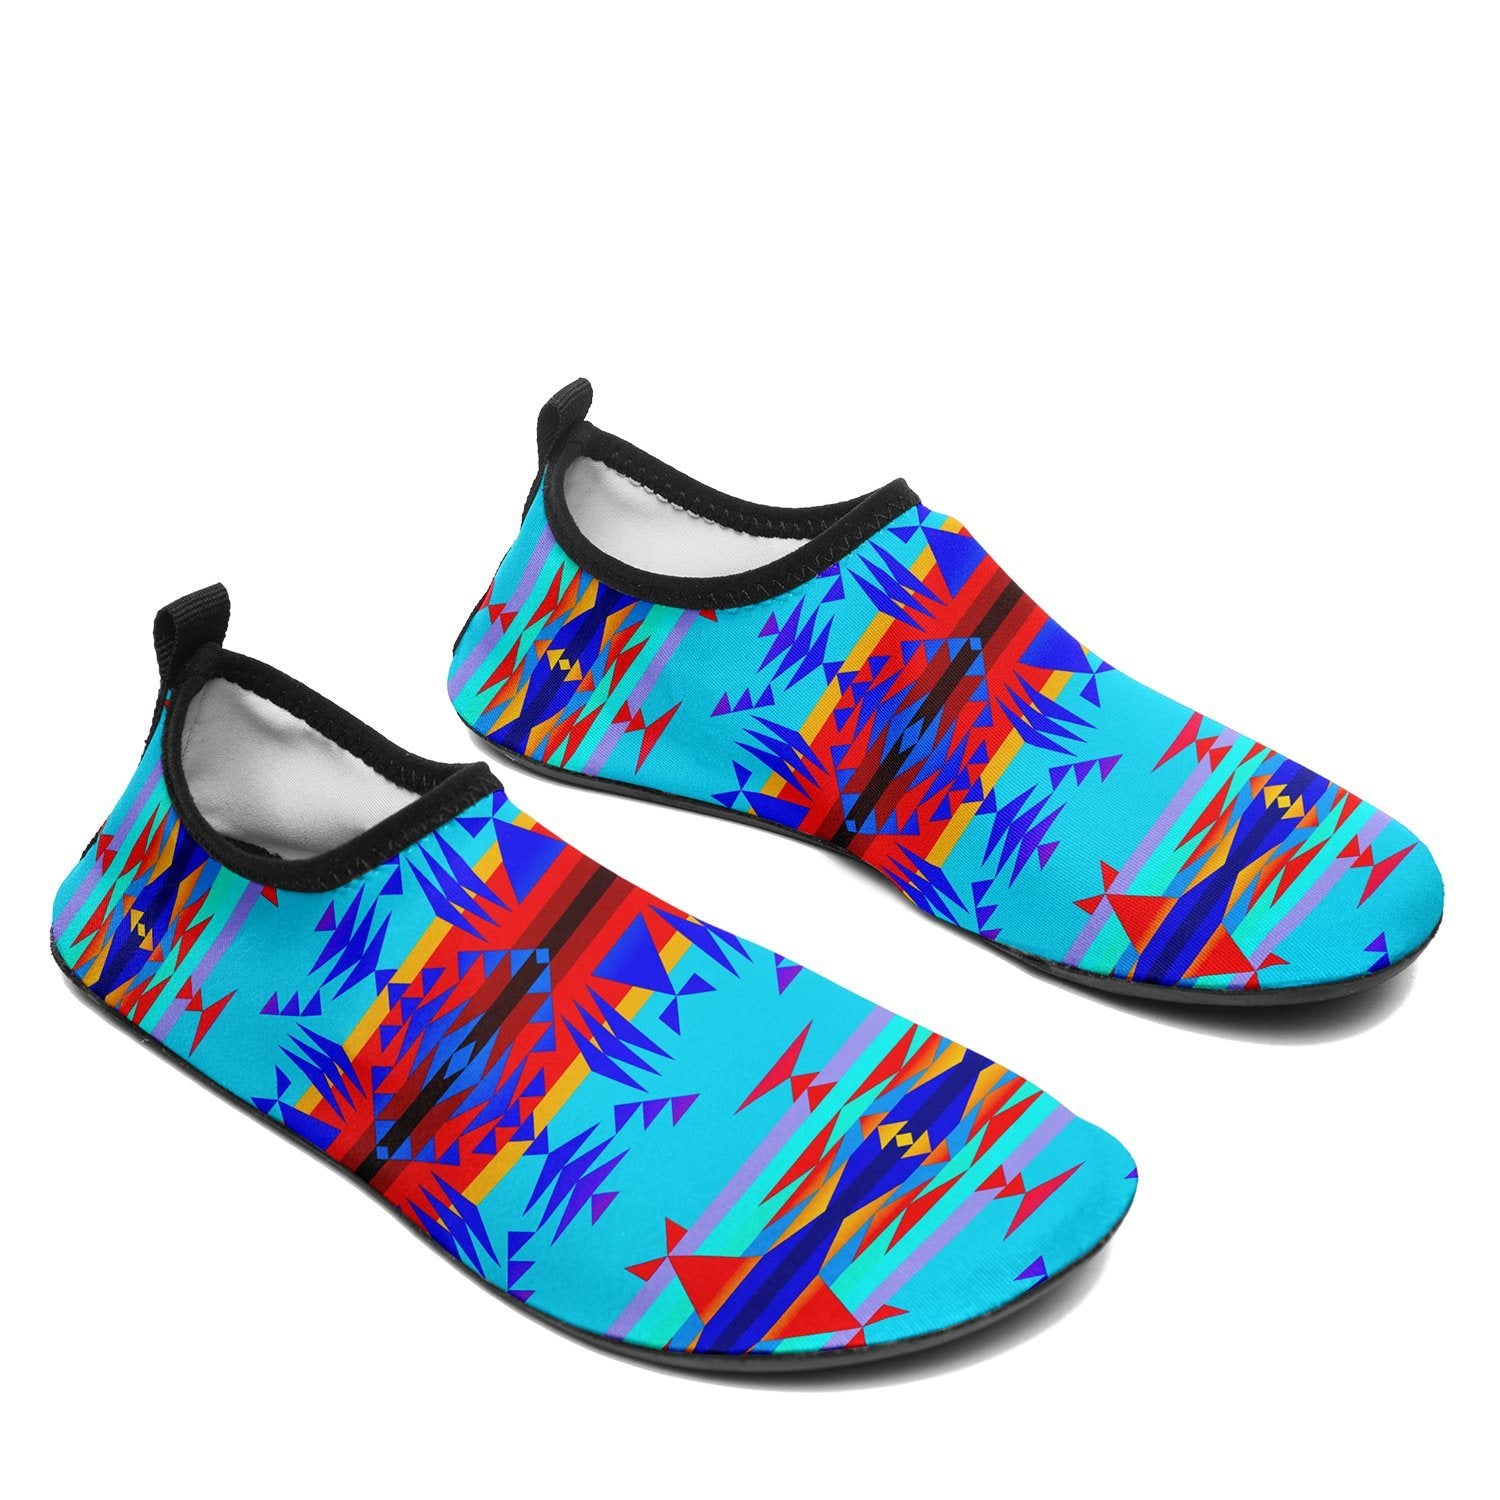 Between the Mountains Blue Sockamoccs Slip On Shoes 49 Dzine 